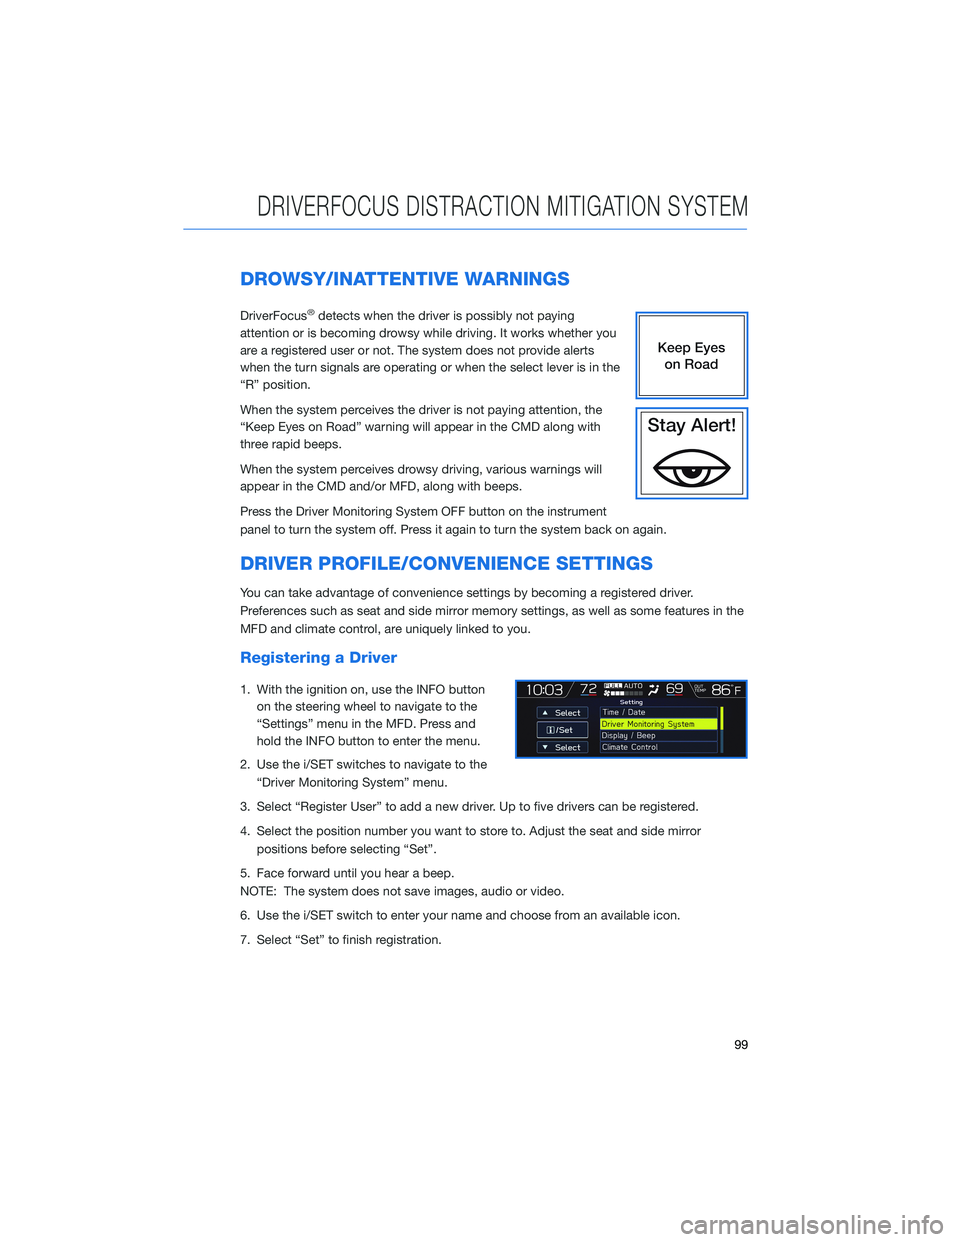 SUBARU FORESTER 2021  Getting Started Guide DROWSY/INATTENTIVE WARNINGS
DriverFocus®detects when the driver is possibly not paying
attention or is becoming drowsy while driving. It works whether you
are a registered user or not. The system doe